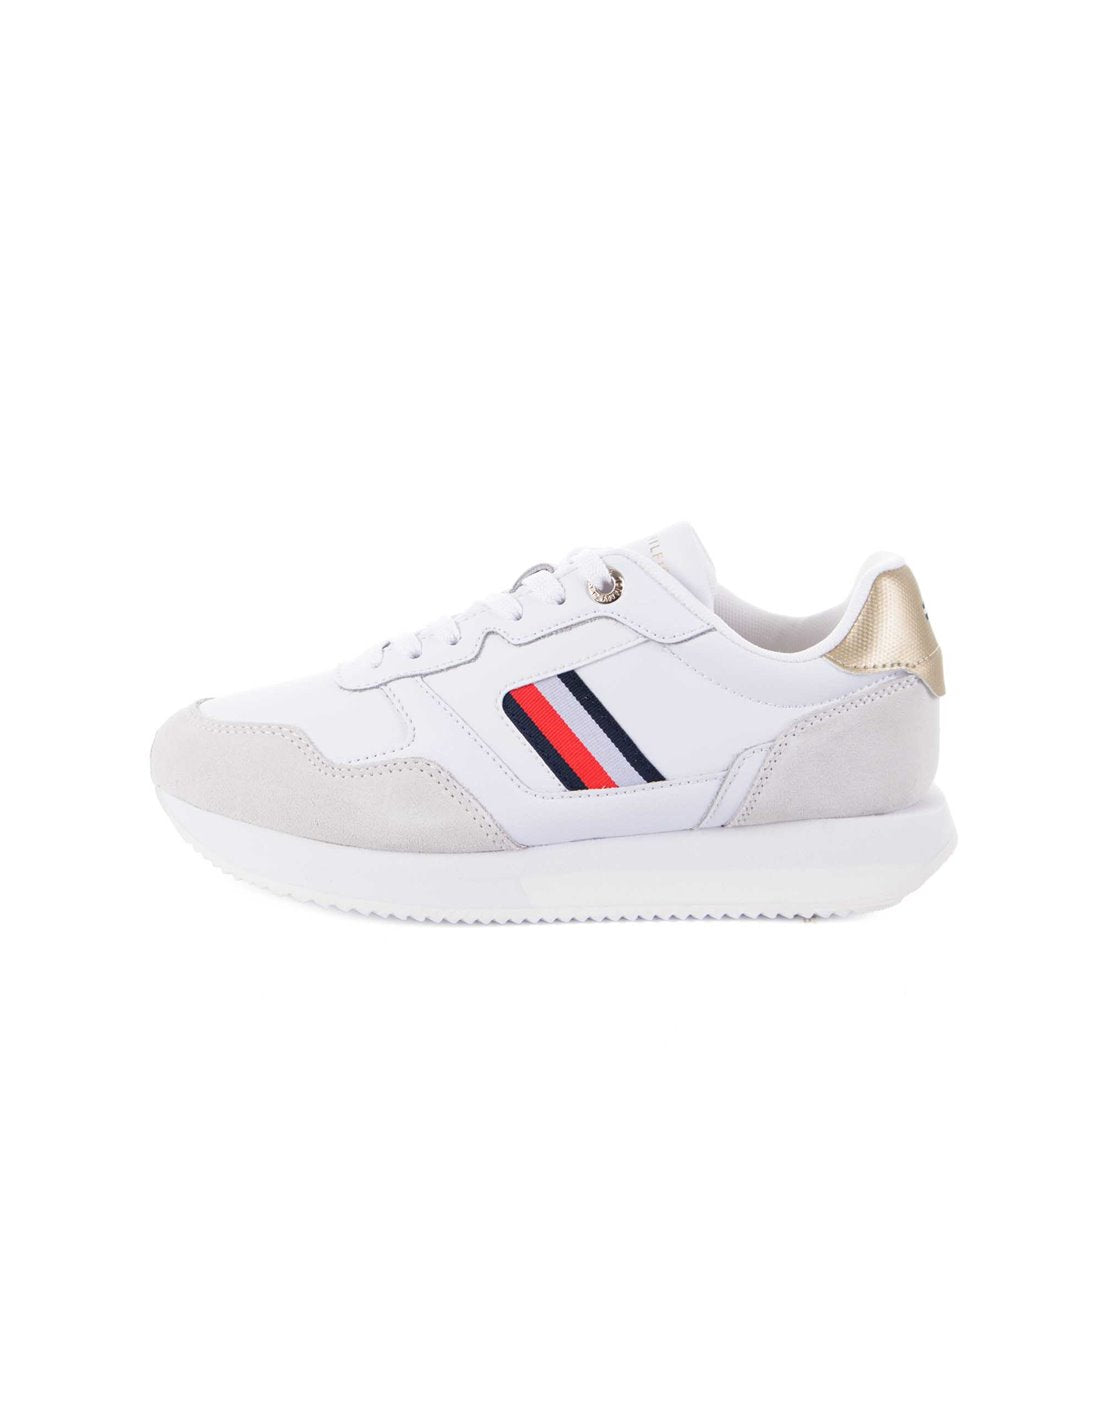 Tommy Hilfiger Fw075840 Womens Ftw Lifestyle Runner